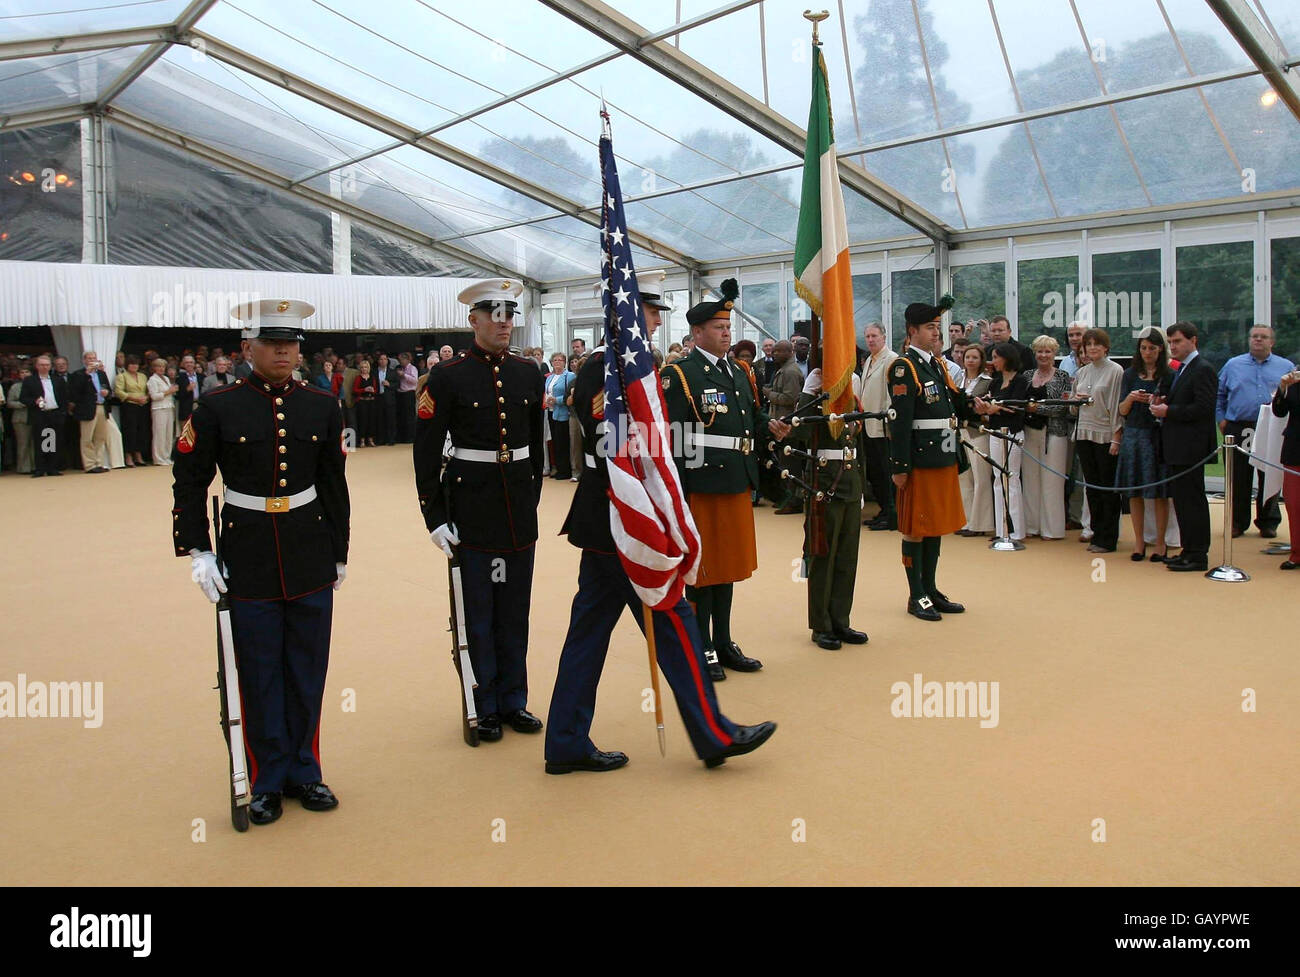 Members of the United States Marine Corp and the Irish Defence forces take part in celebrations at the US Ambassador's residence in Phoenix Park, to mark the 4th of July, American Independence Day. Dublin. Stock Photo